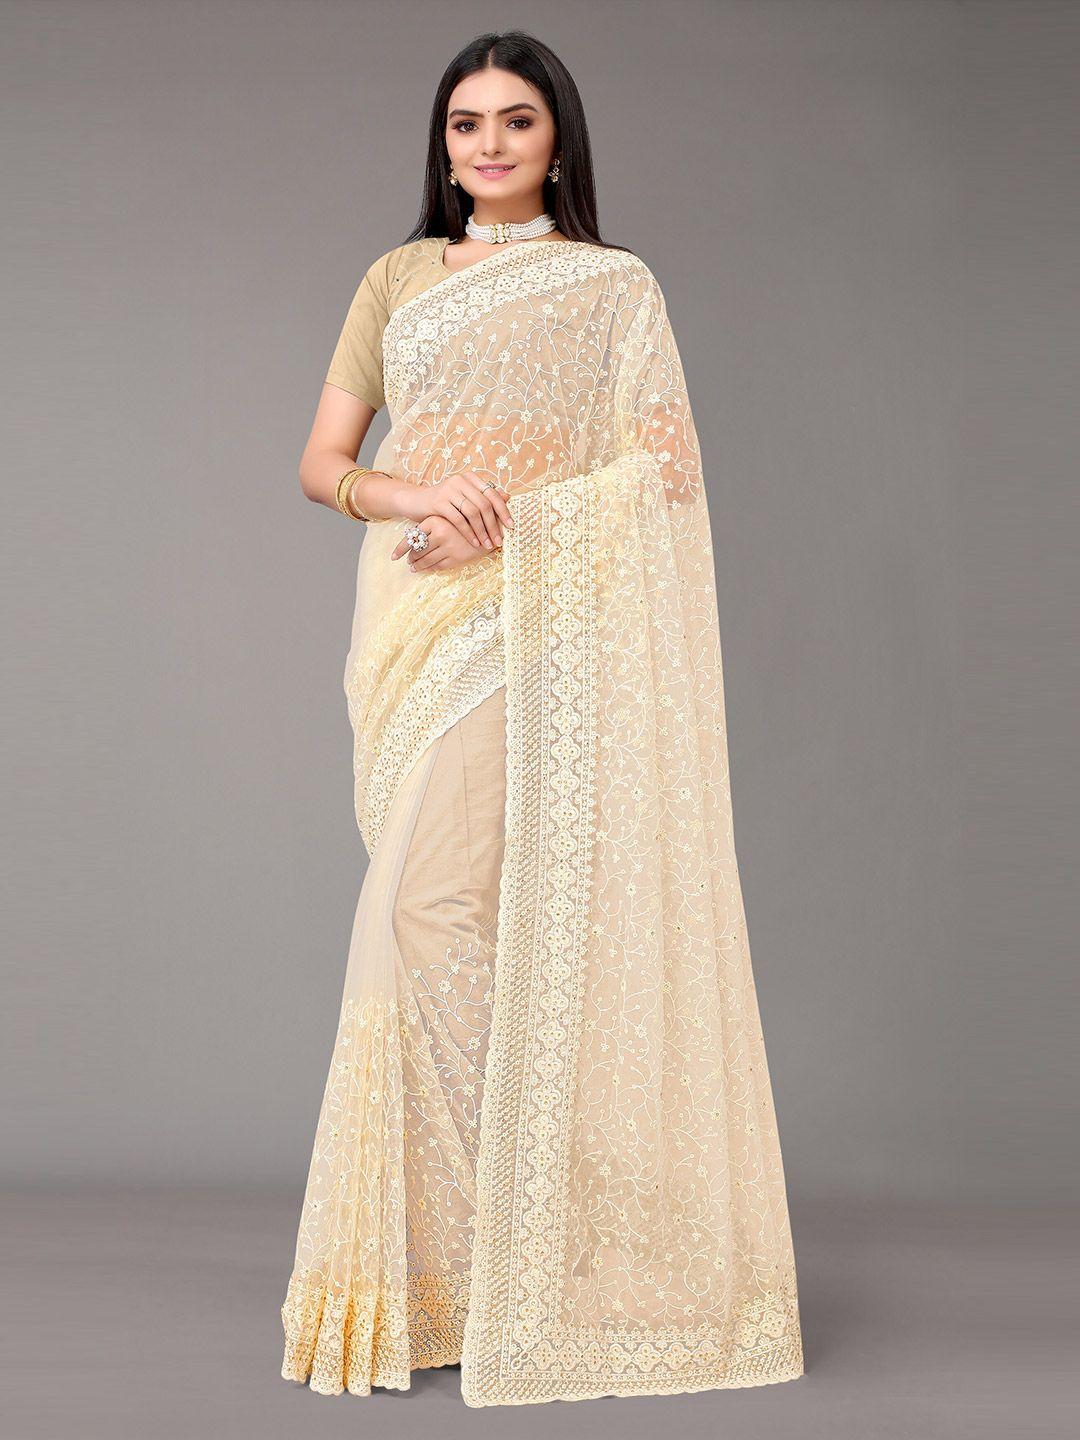 nimayaa beige colored net embroidered saree with matching net blouse